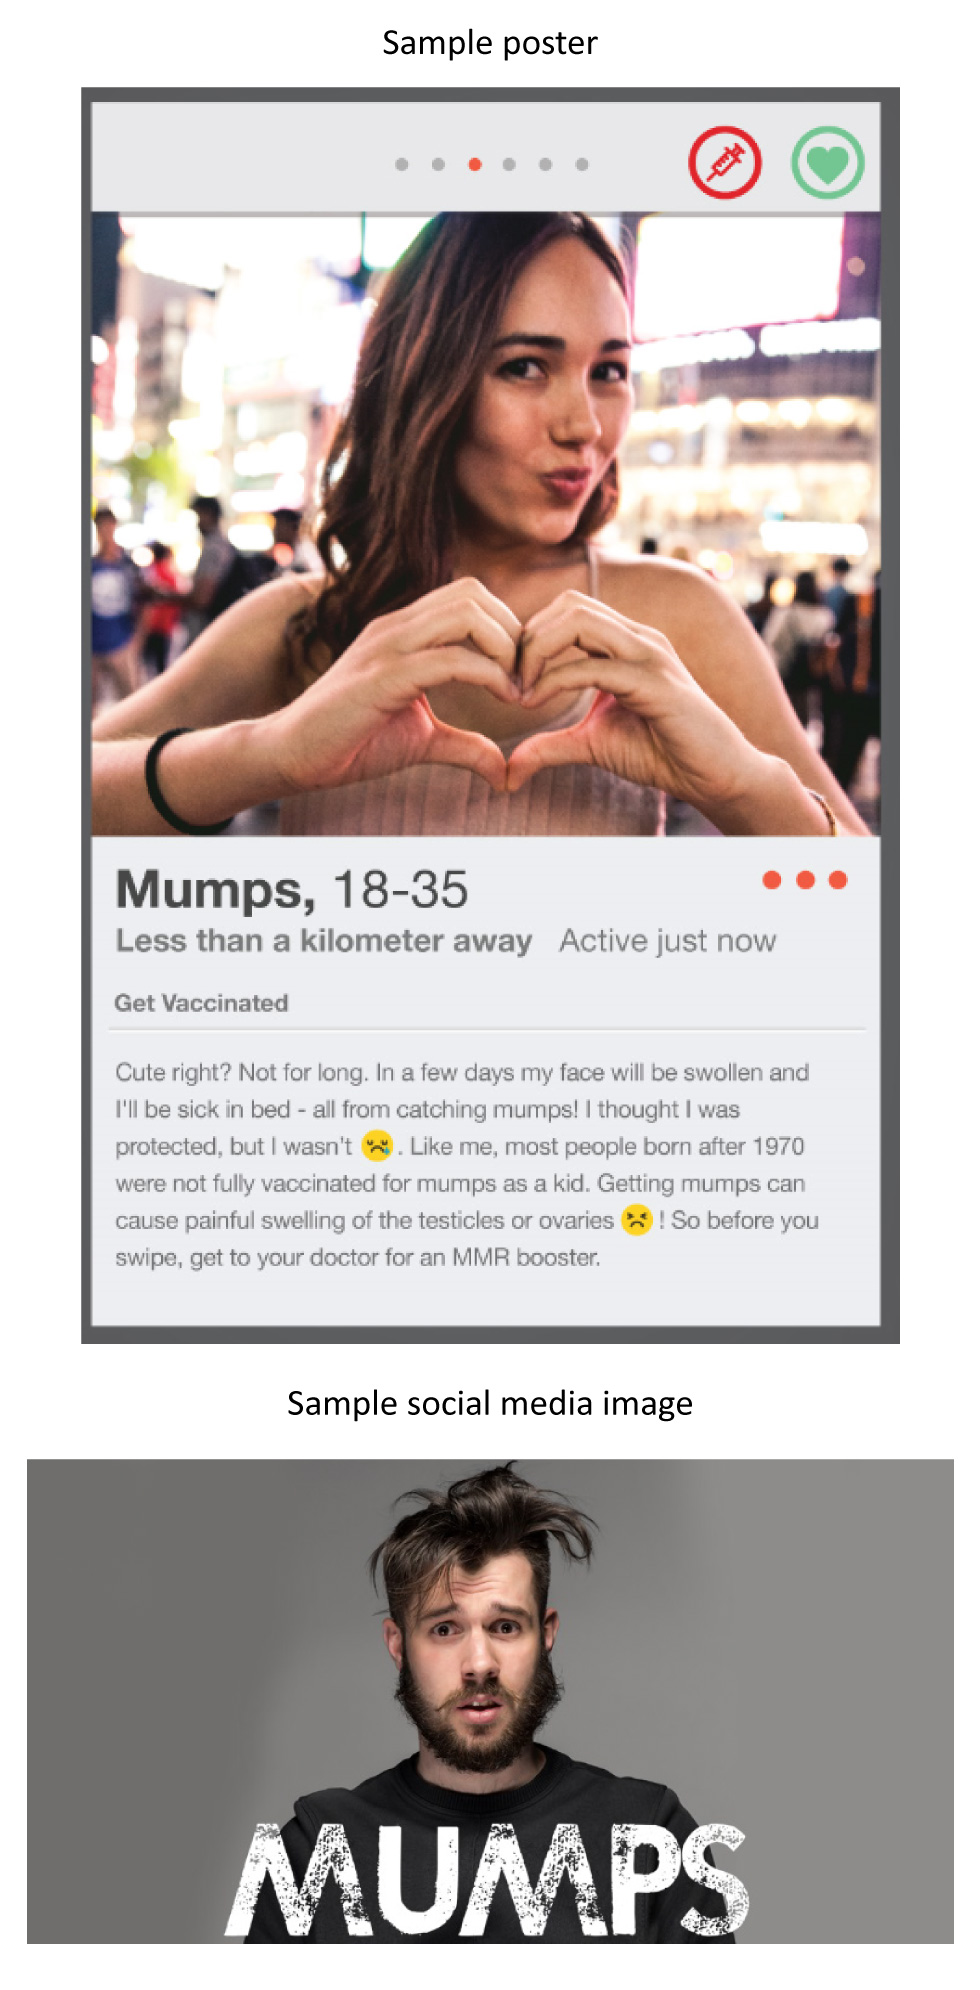 Figure 1: Sample poster and social media image used for Toronto mumps outbreak, 2017–2018